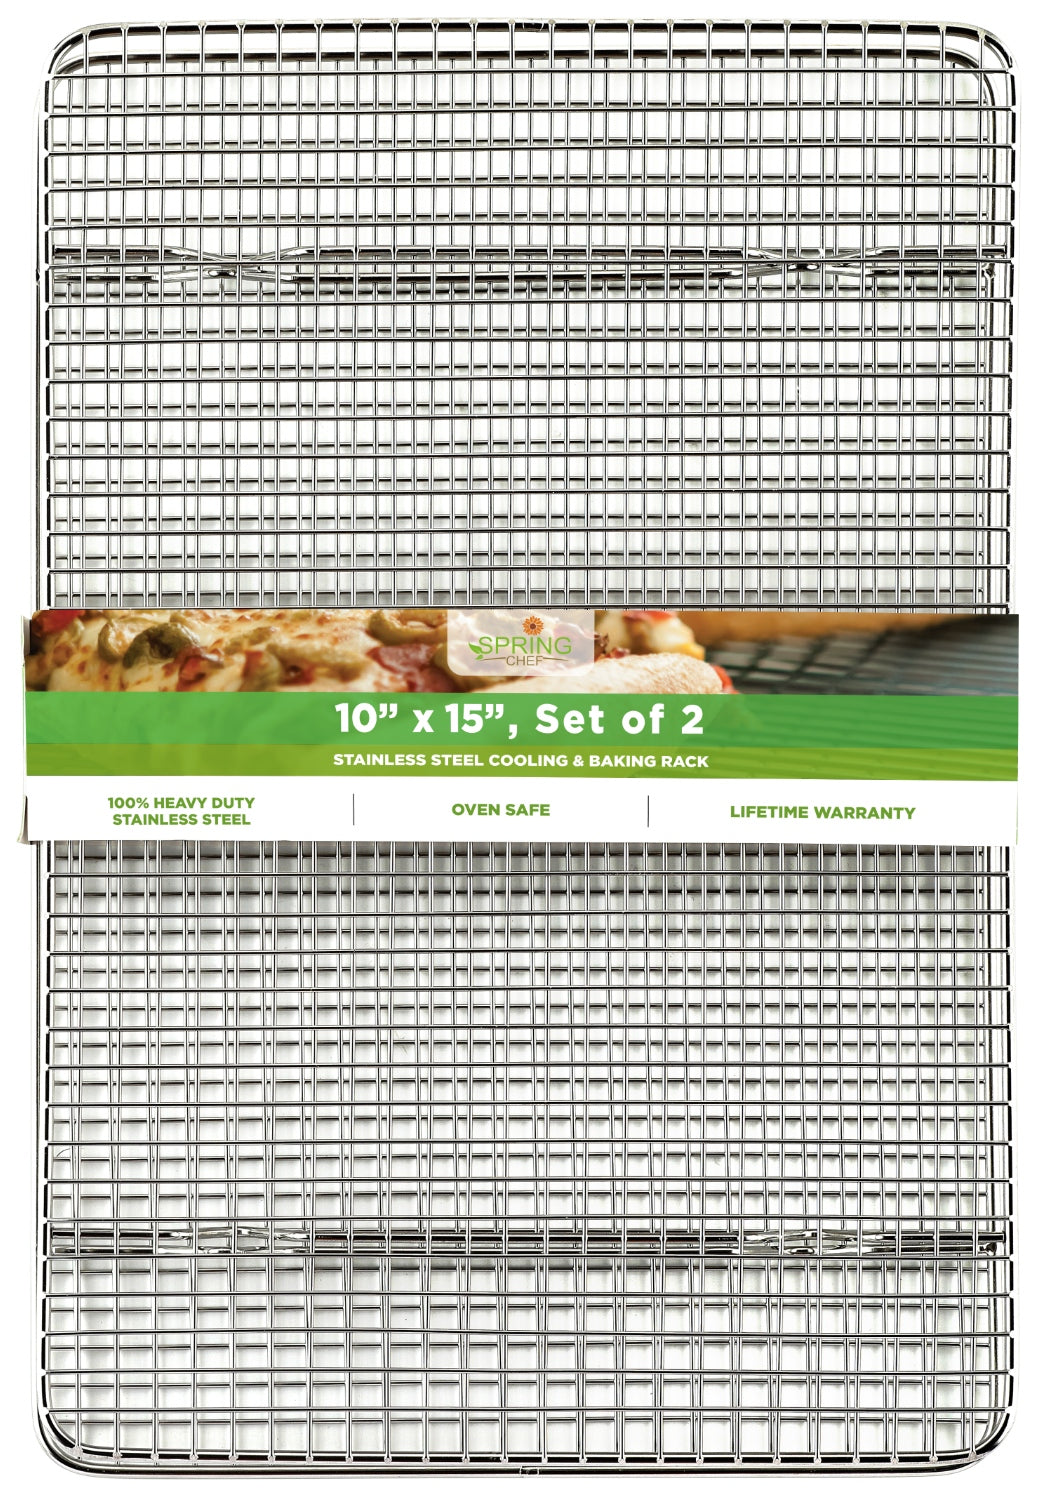 Spring Chef Cooling Rack & Baking Rack - 100% Stainless Steel Cookie  Cooling Racks, Wire Rack for Baking, Oven Safe 10 x 15 Inches Fits Jelly  Roll Pan